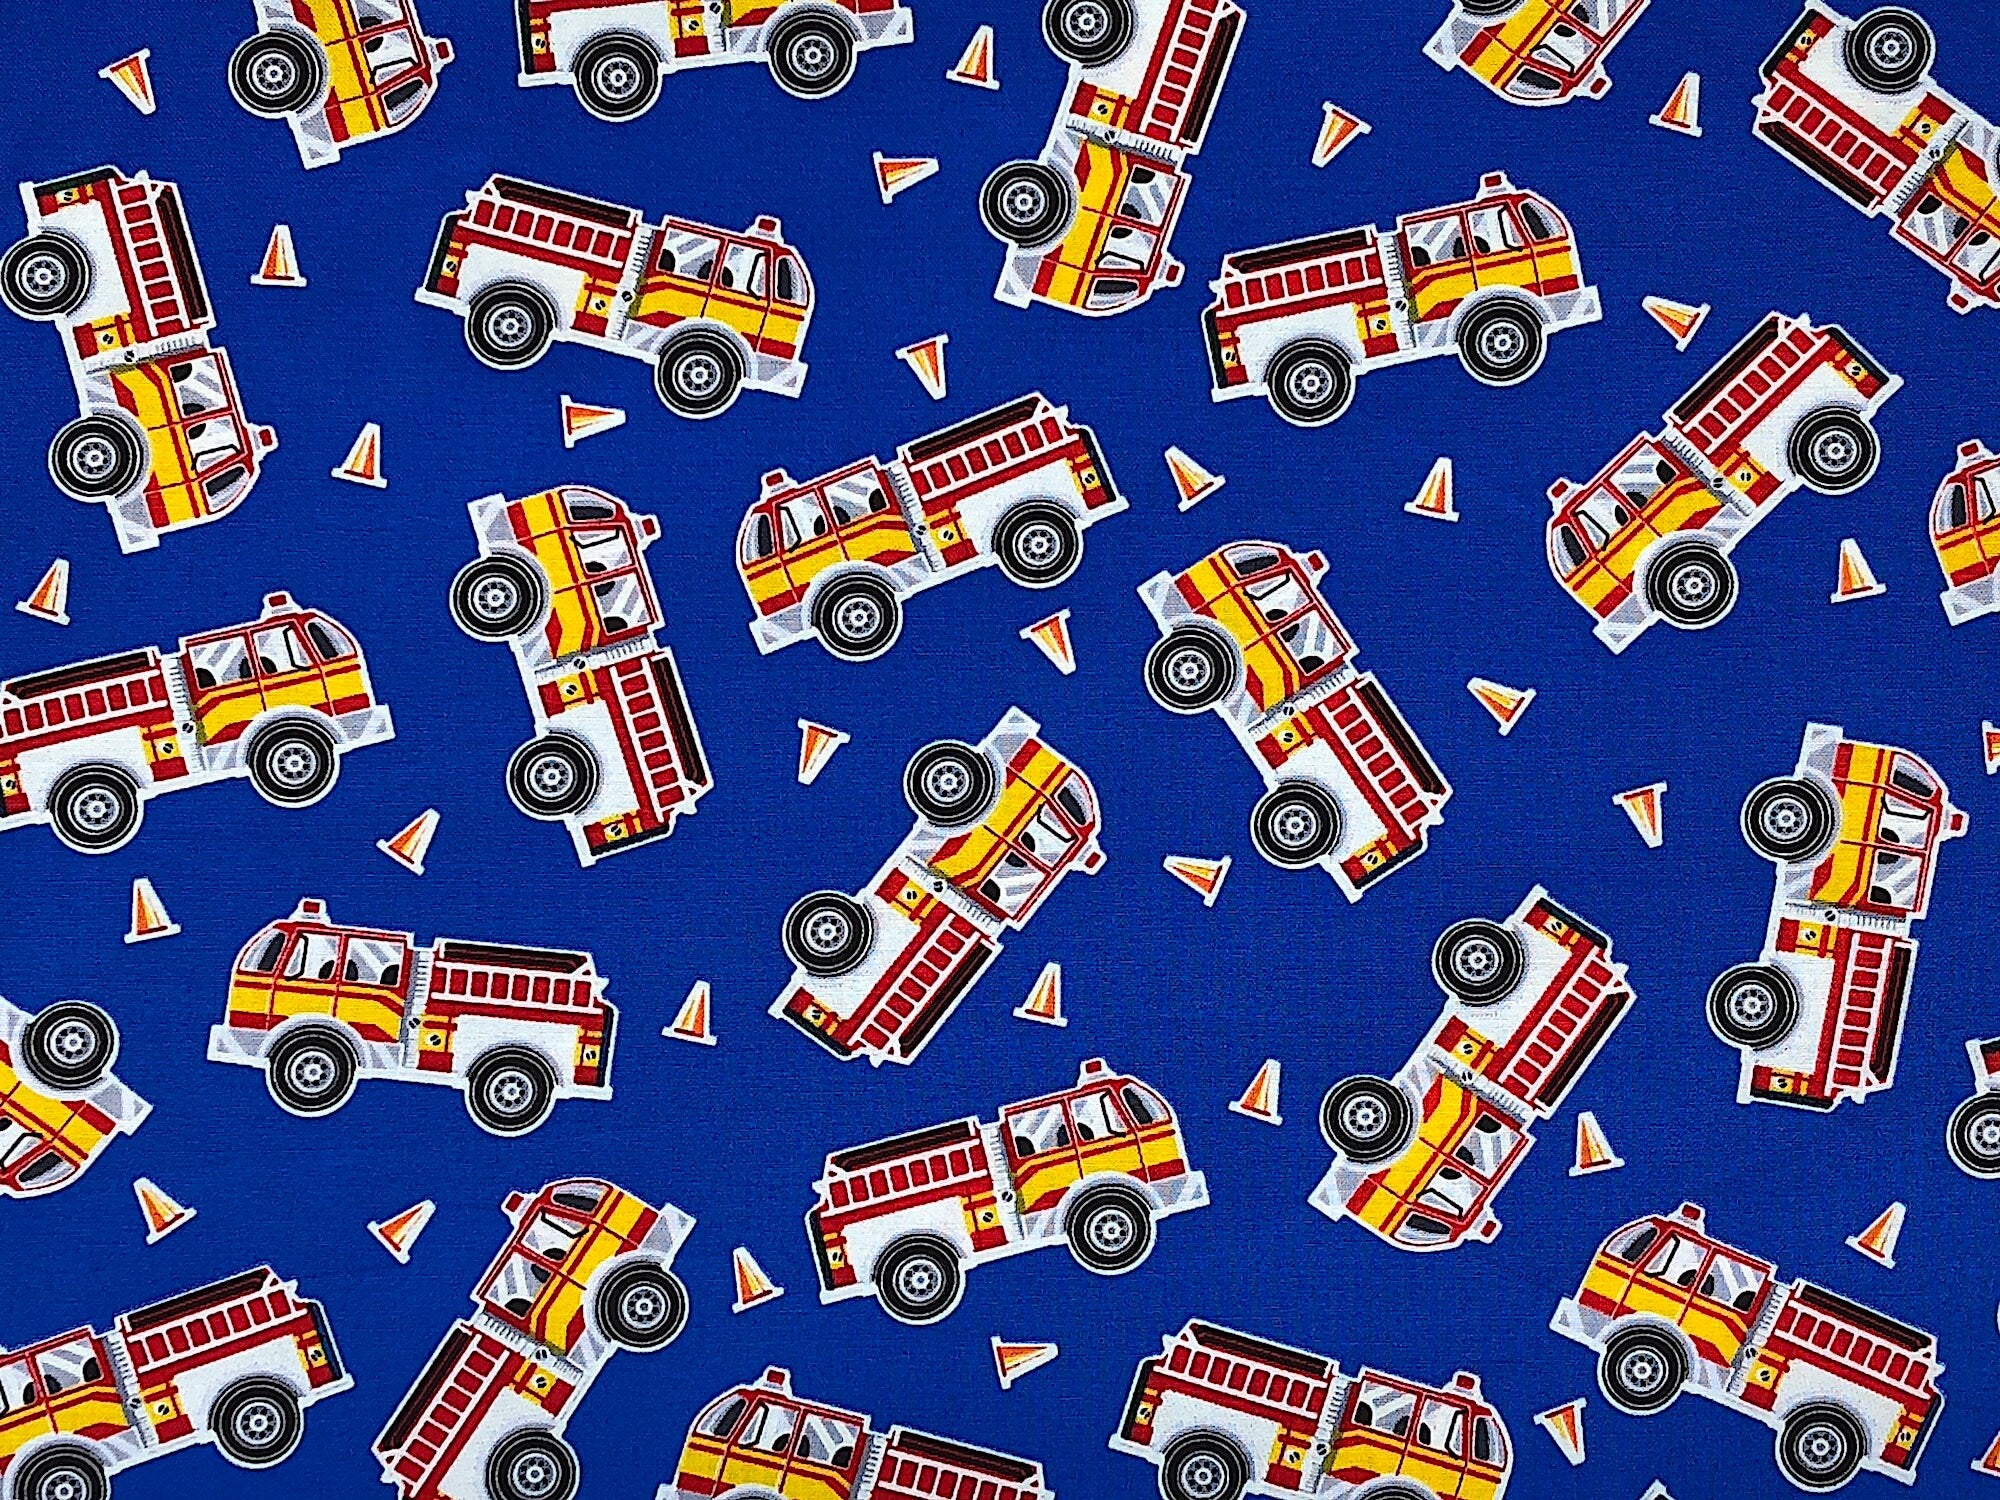 This fabric is called Fire Engines Blue and is covered with Fire Engines. The blue background also has orange cones scattered throughout